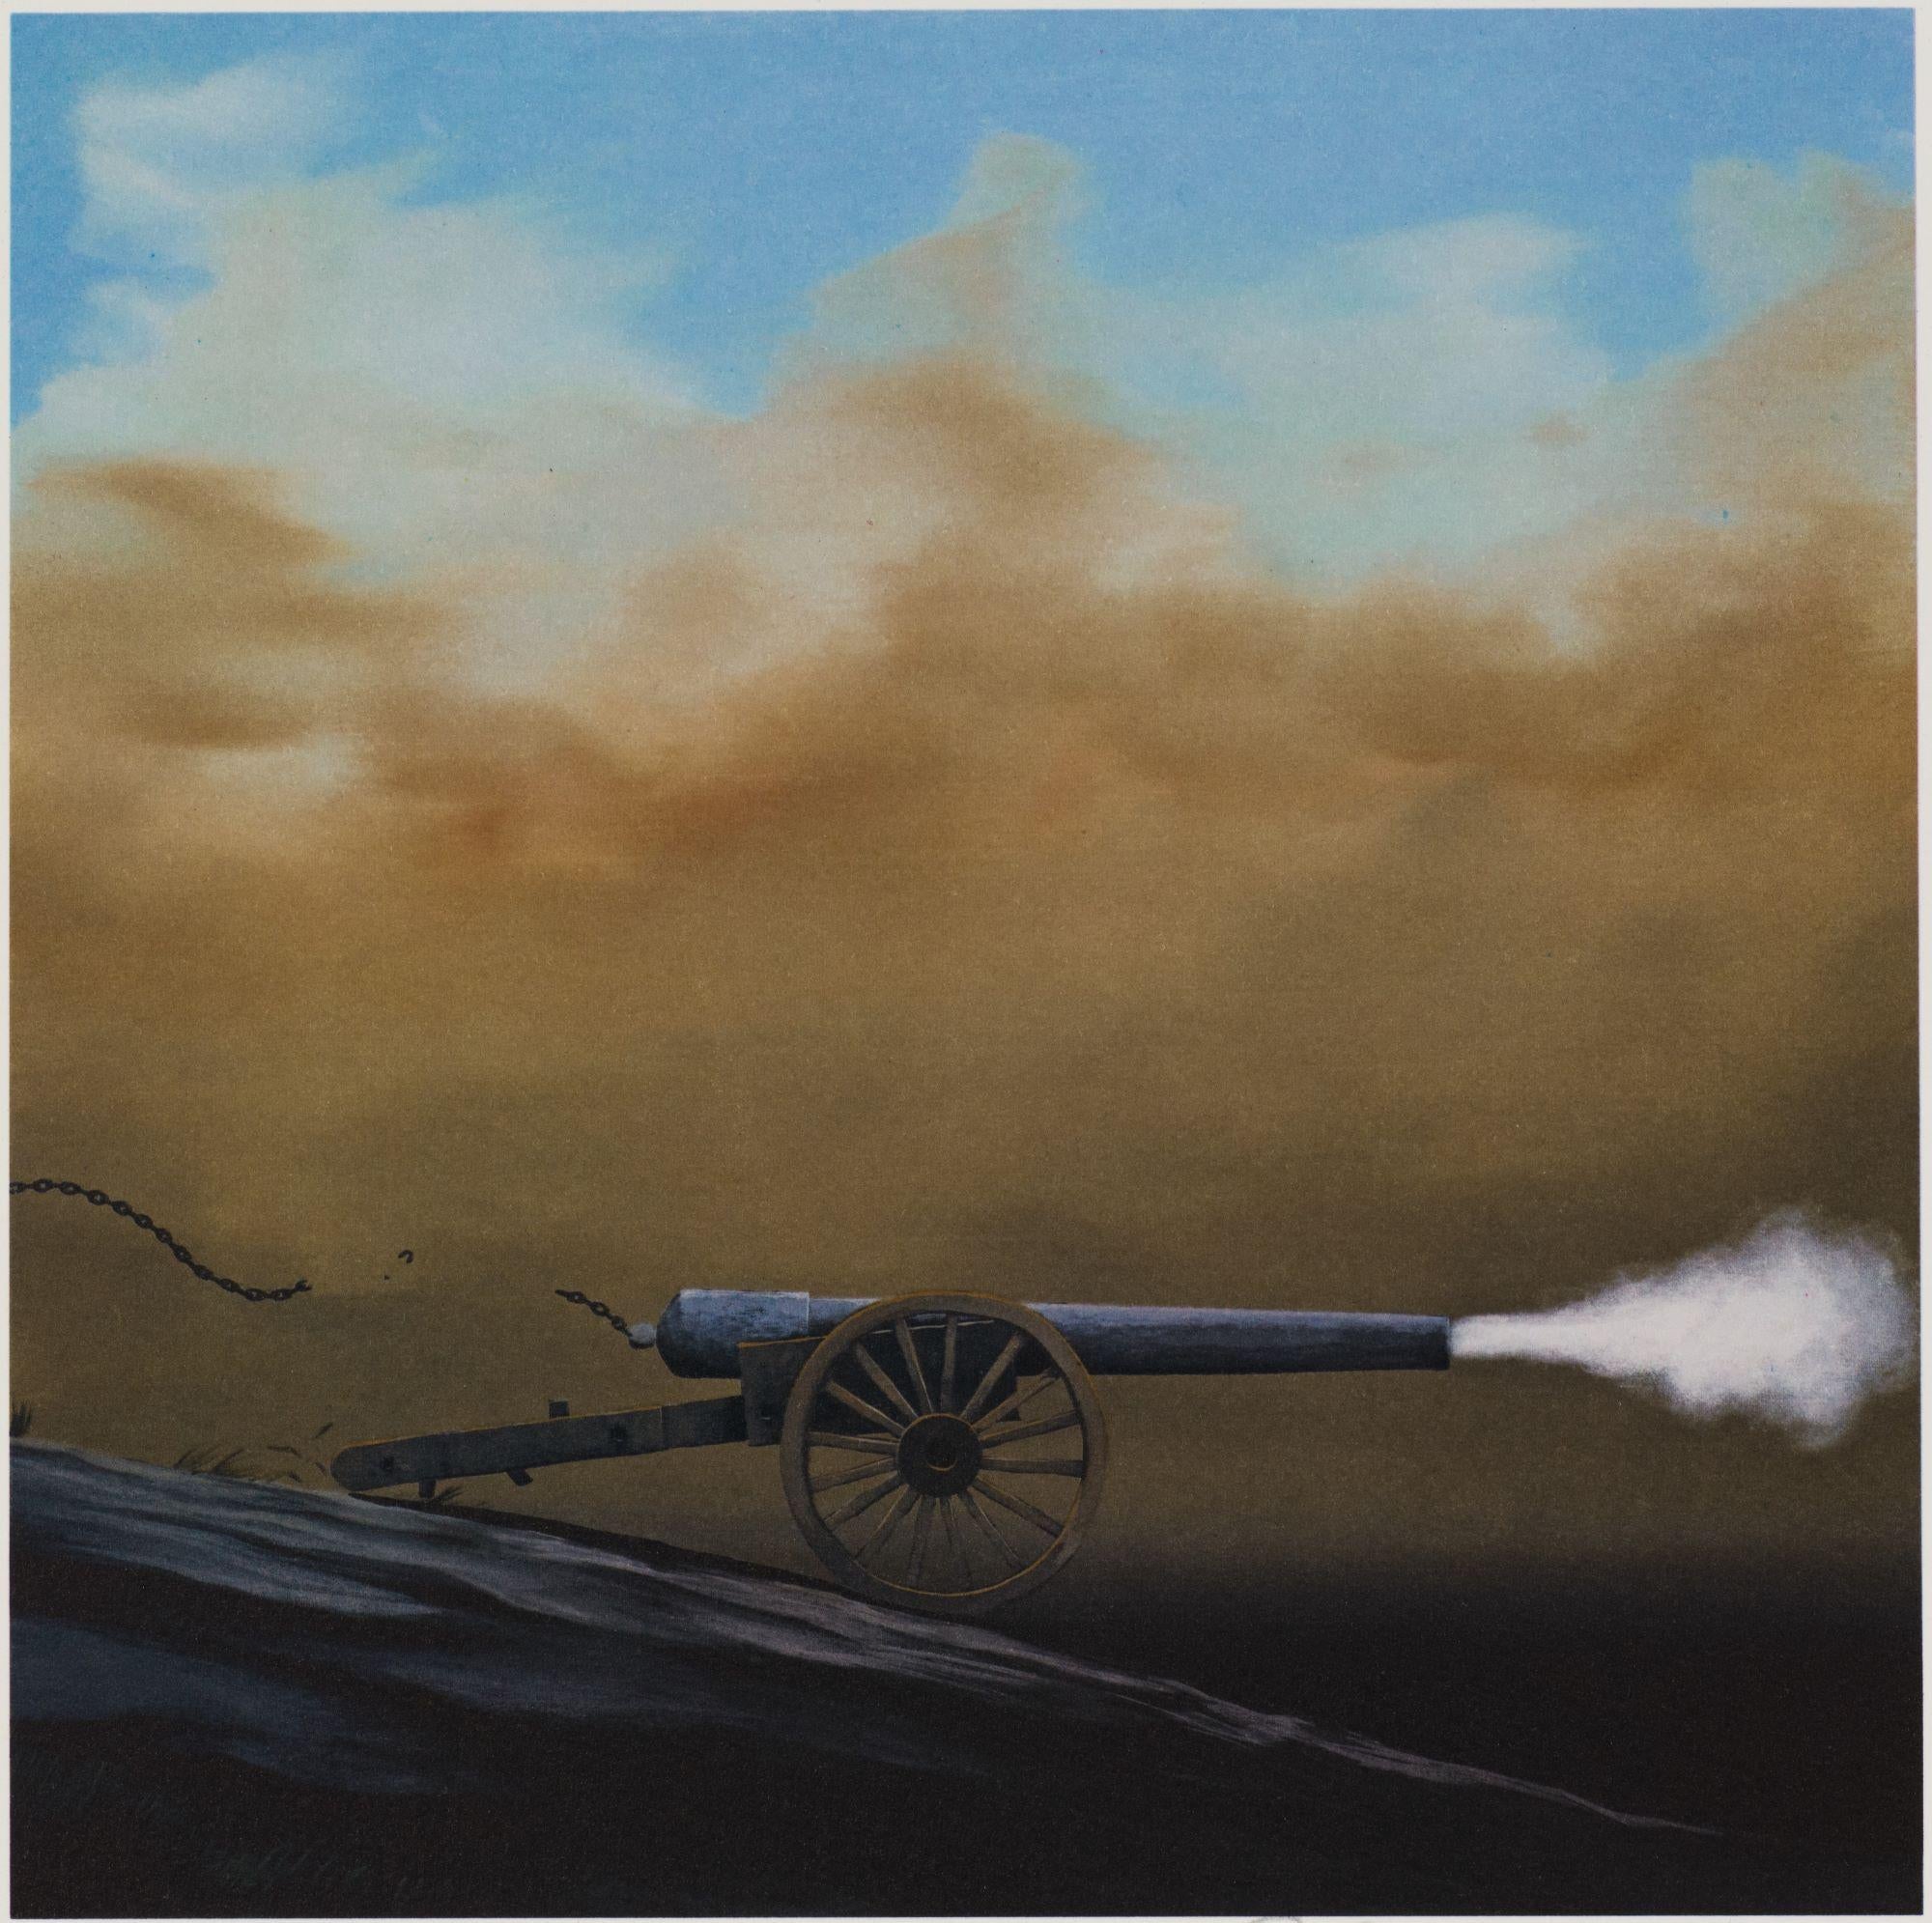 Loose Cannon - Contemporary Print by Robert Deyber 